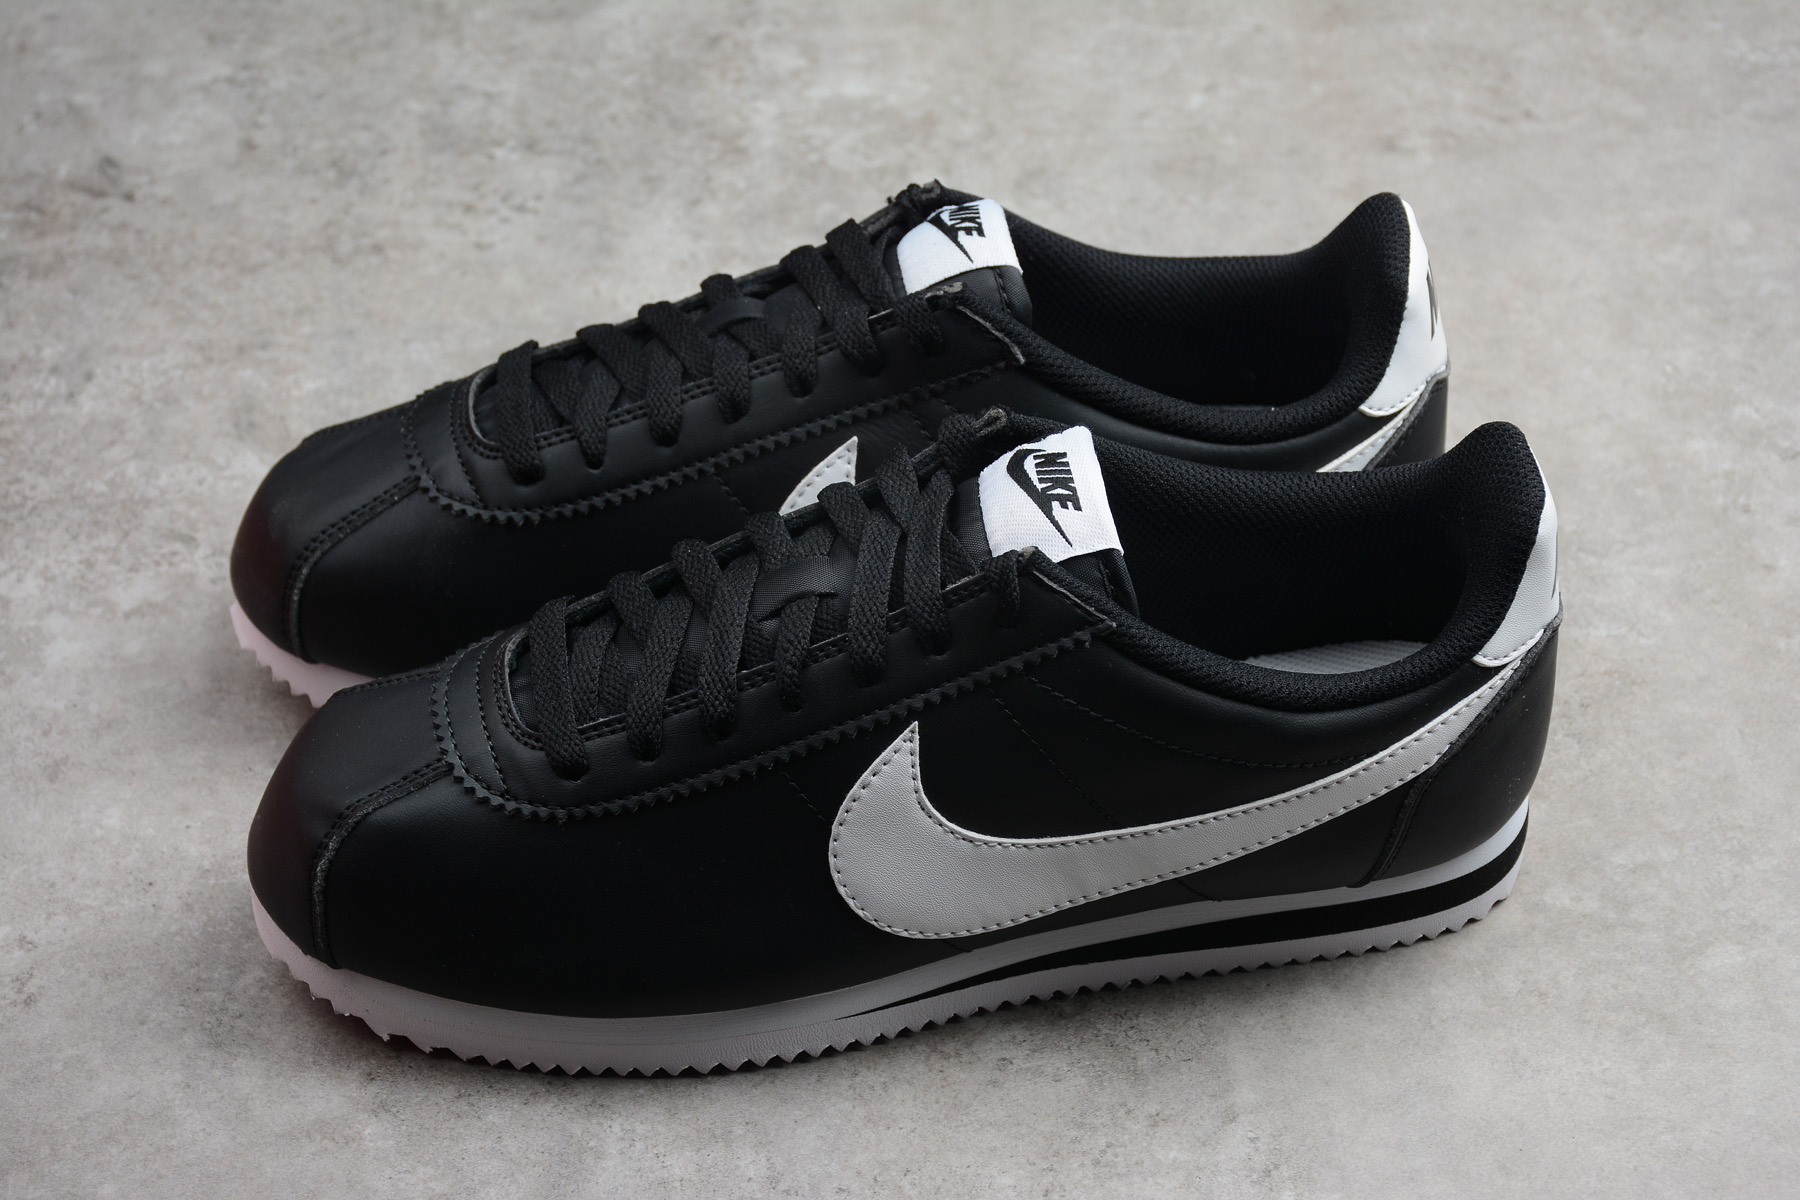 Nike Classic Cortez Leather Black/White Men's and Women's Size 807471-010